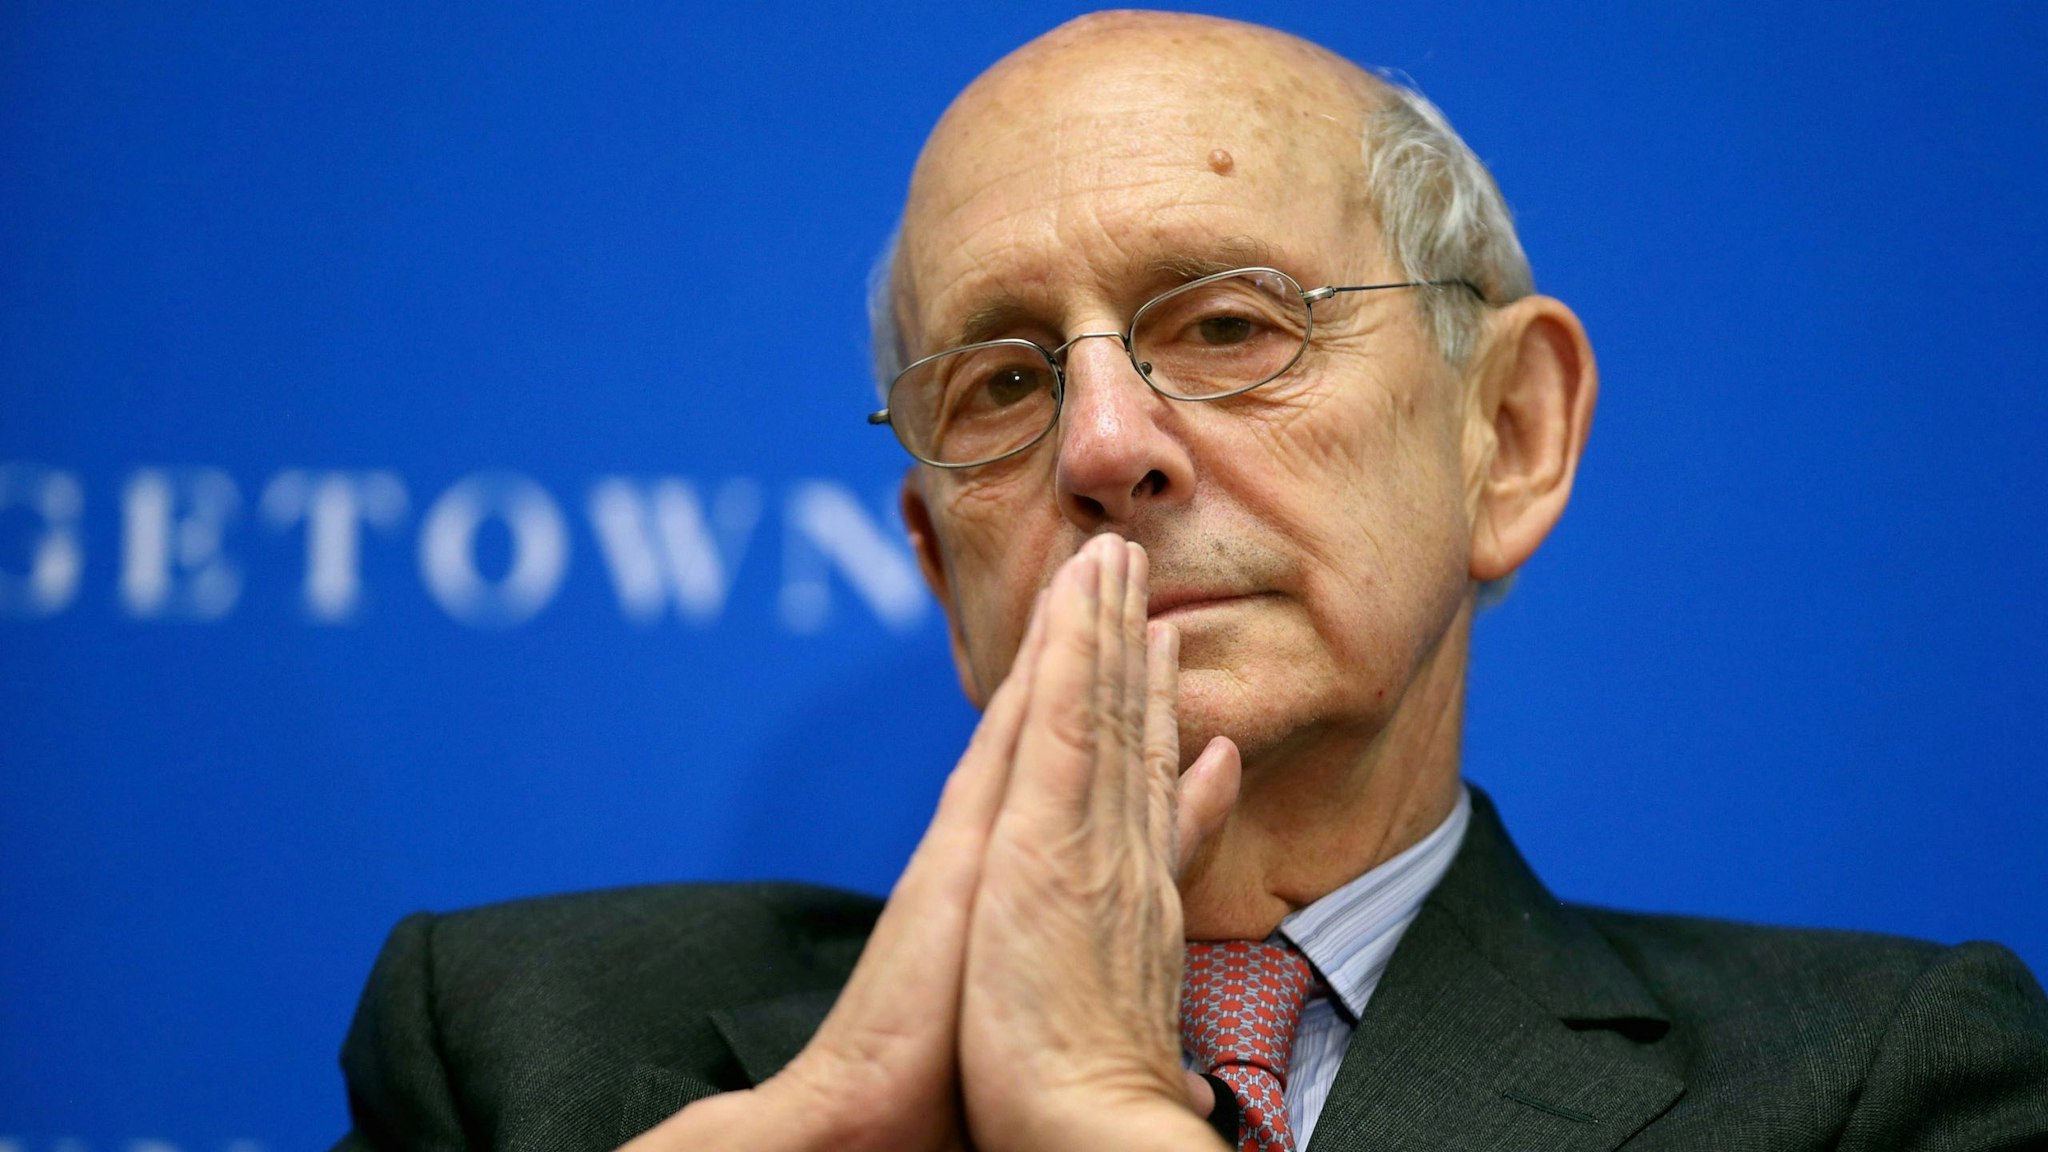 WASHINGTON, DC - APRIL 21: Supreme Court Associate Justice Stephen Breyer participates in a panel on "Lessons from the Past for the Future of Human Rights: A Conversation" at the Gewirz Student Center on the campus of the Georgetown University Law Center April 21, 2014 in Washington, DC. Organized by the law center, the New York Review of Books and the Bingham Centre for the Rule of Law the forum focused on the future of human rights.